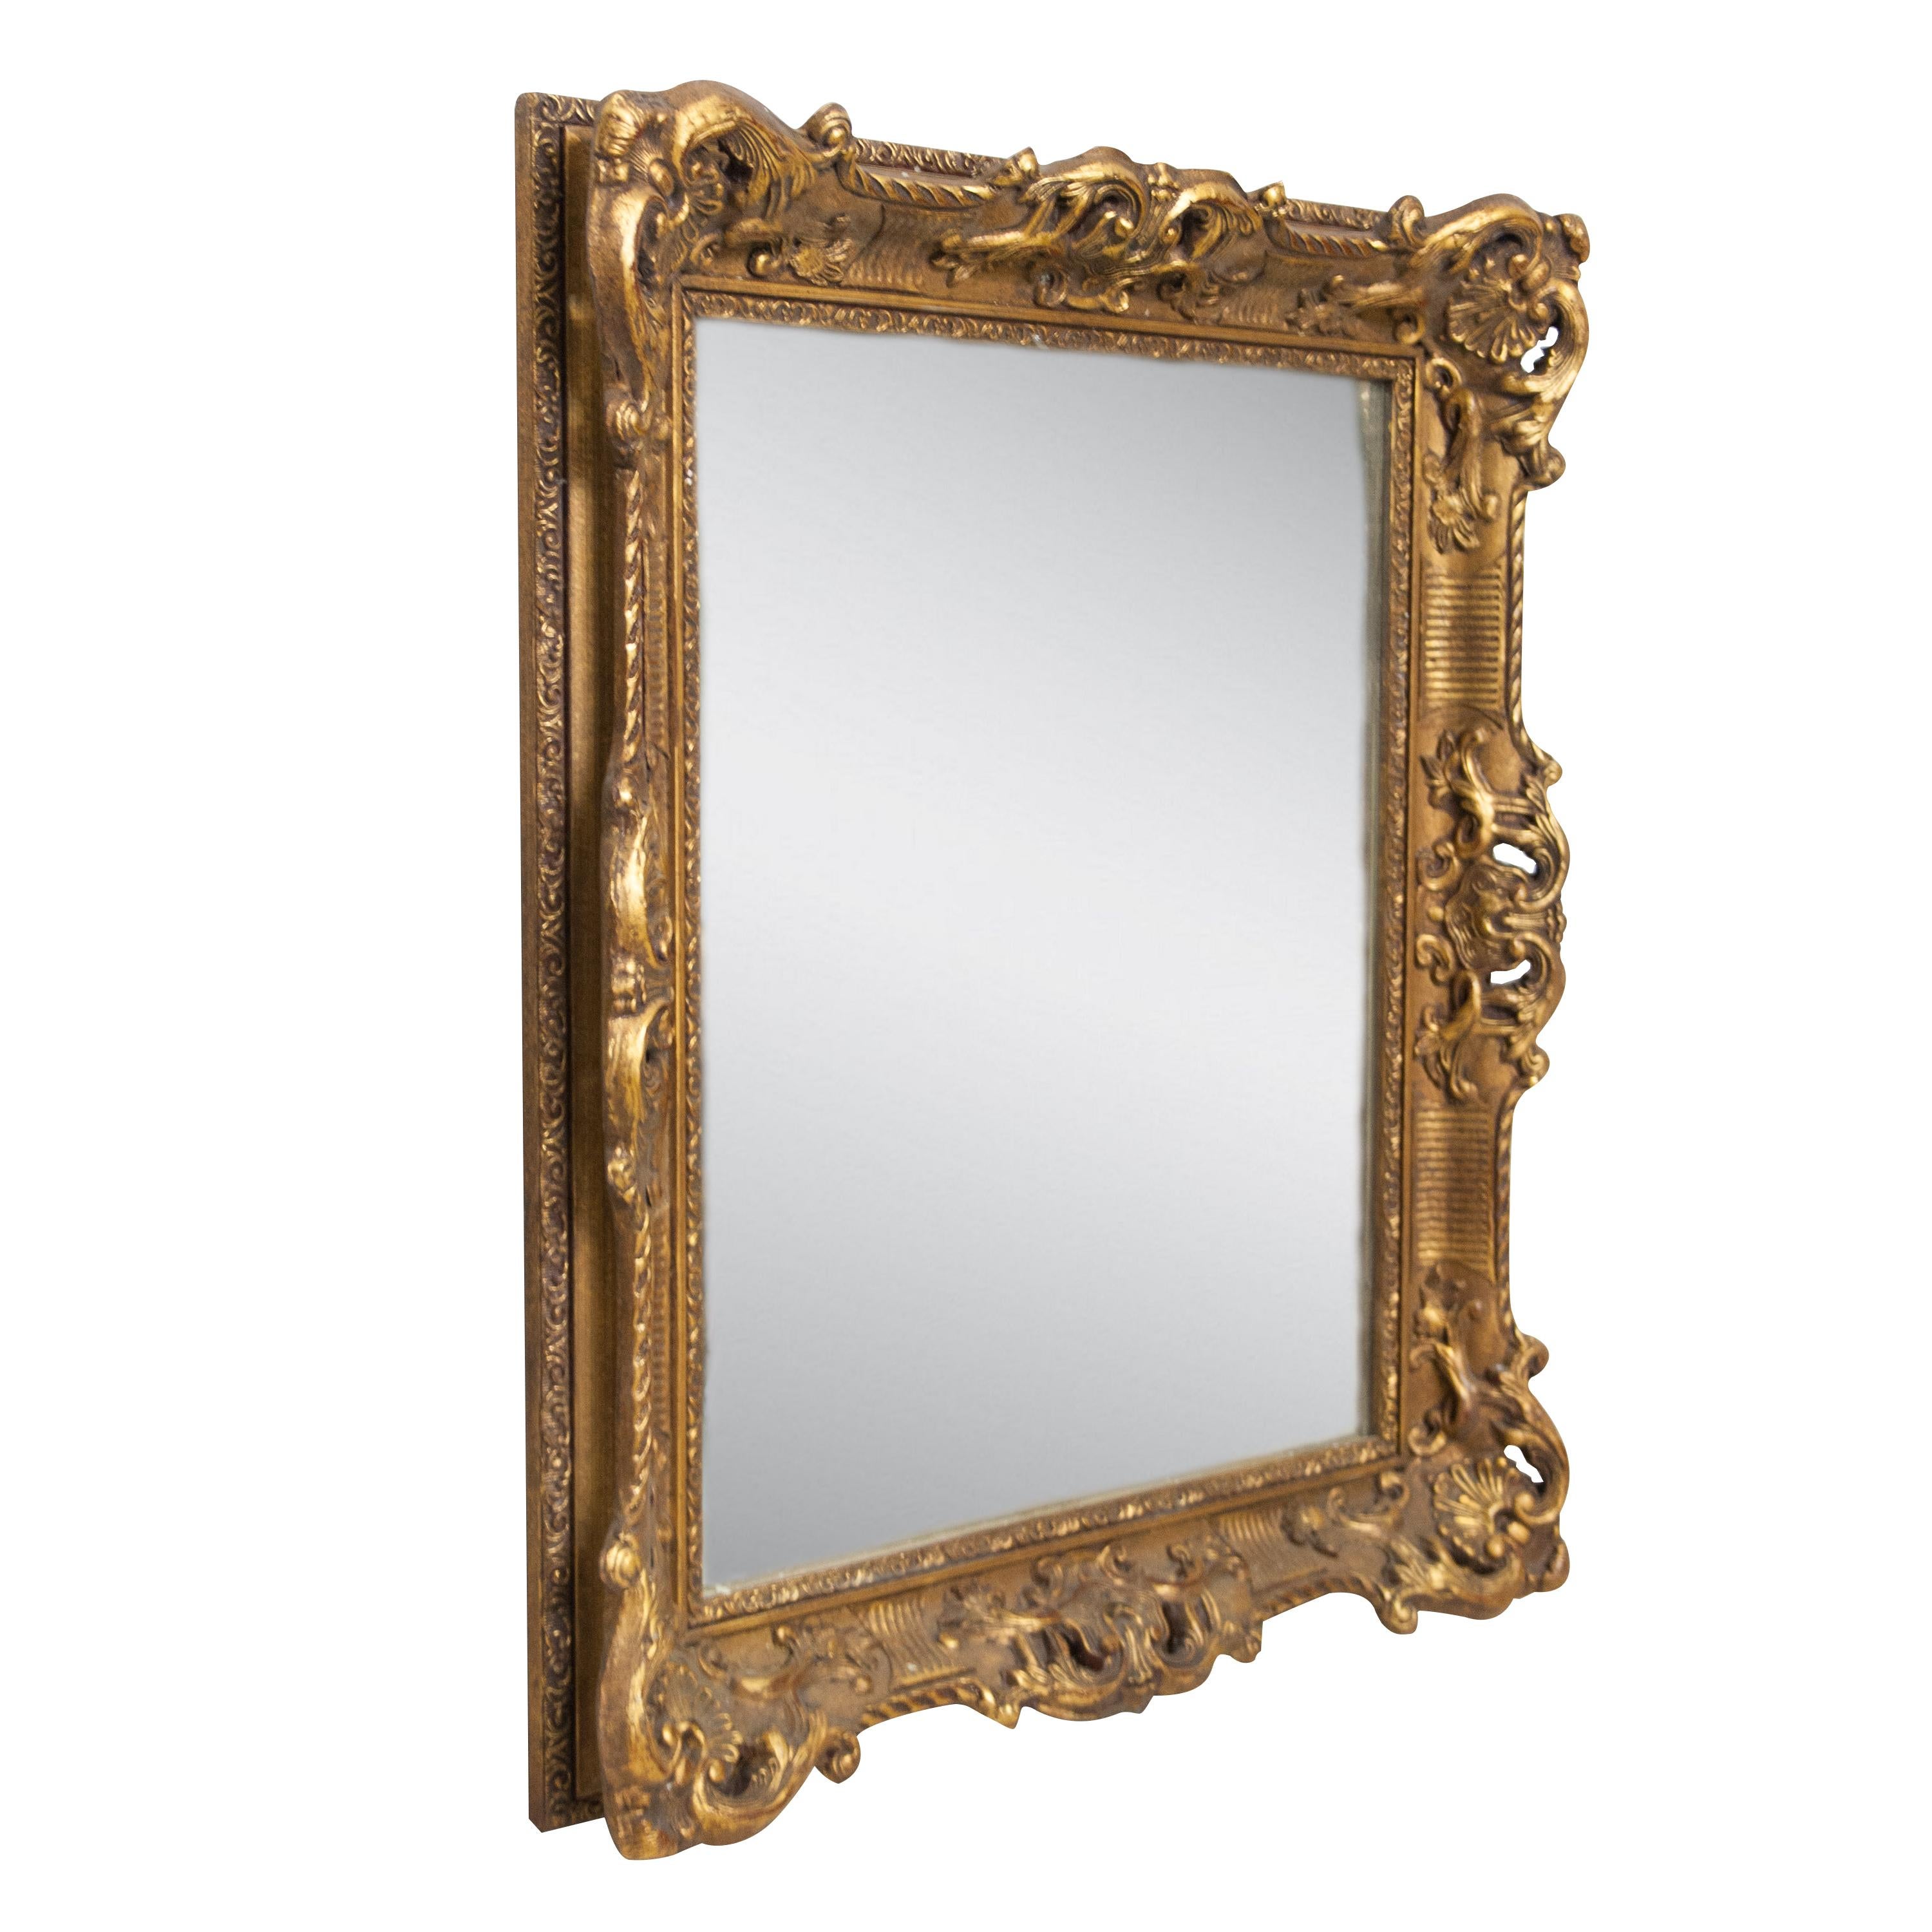 Neoclassical Empire rectangular handcrafted mirror. Rectangular hand carved wooden structure with gold foil finish, Spain, 1970.